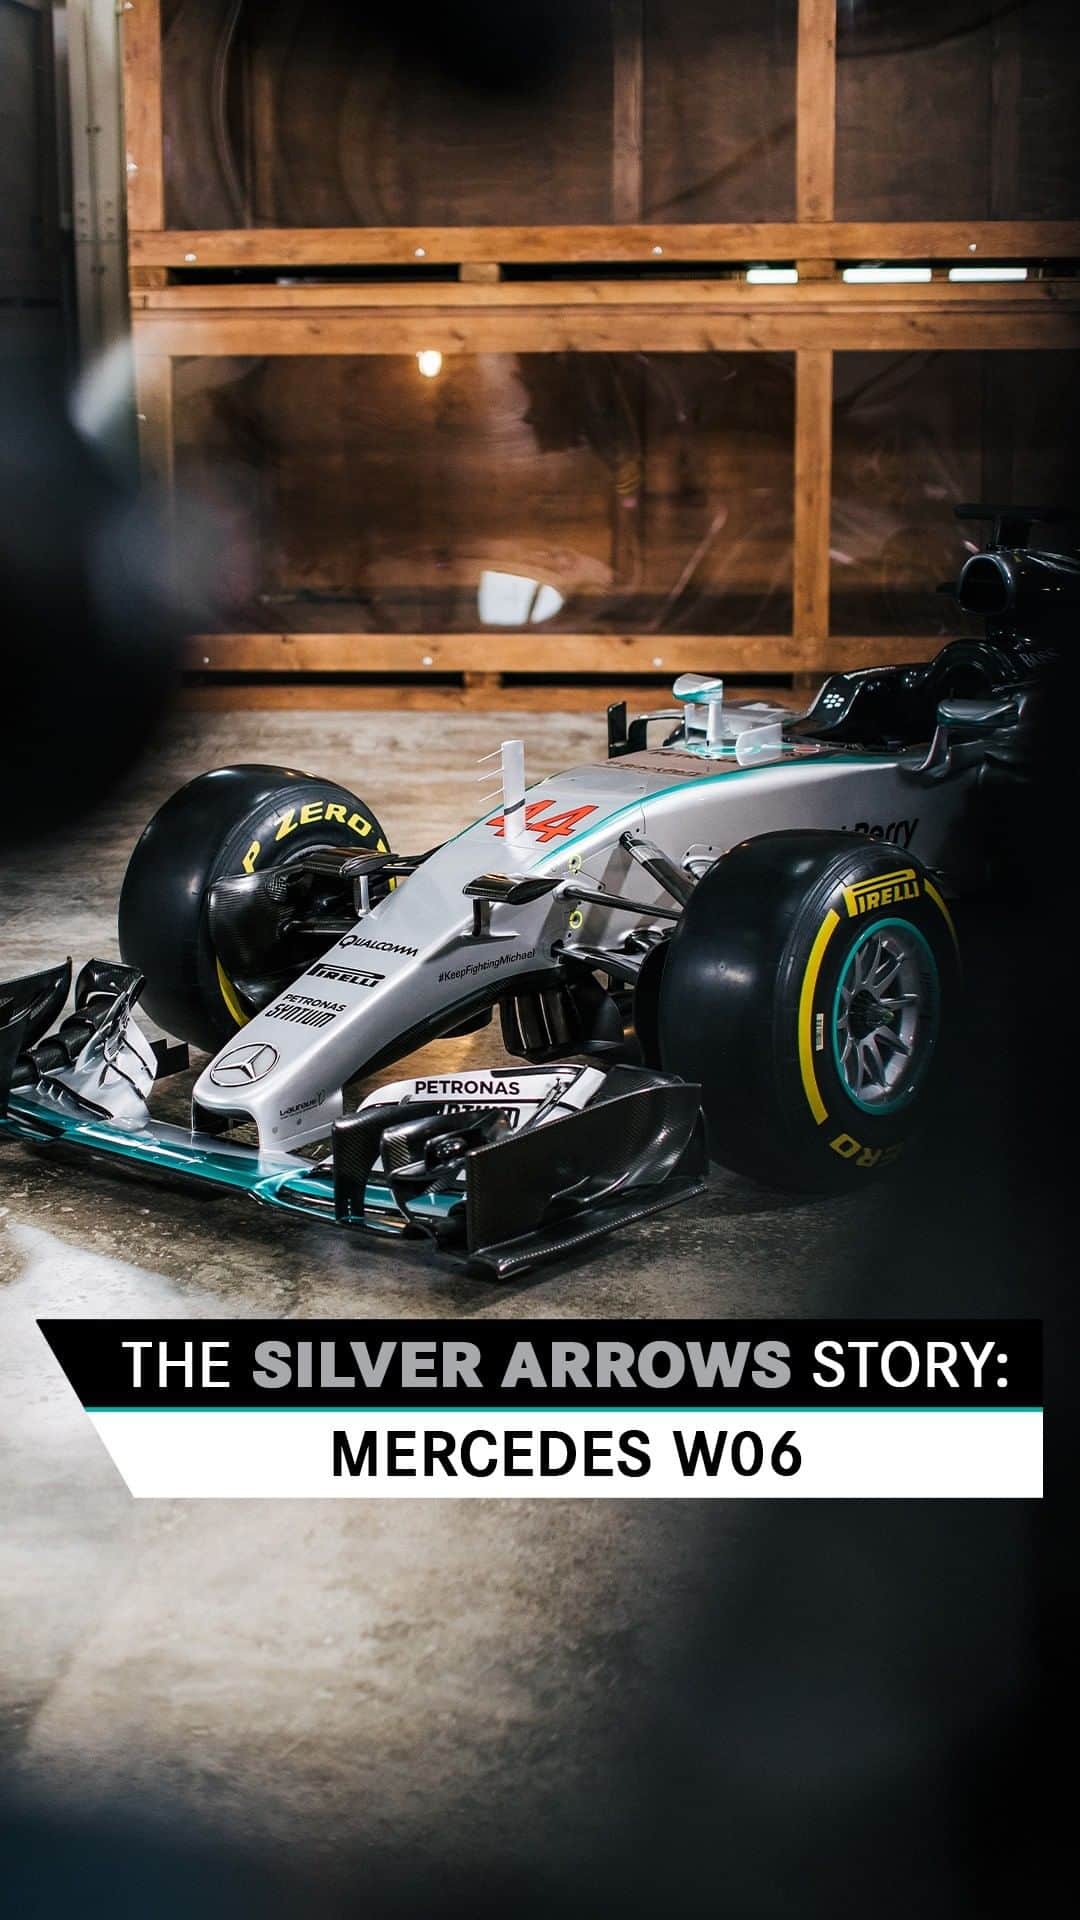 Mercedes AMGのインスタグラム：「Our Silver Arrows Story continues...16 wins, 18 poles, and 32 podiums from 19 races 🏆 A truly unforgettable season with the Mercedes W06!  What's your favorite memory from that 2015 season?   📷 @mercedesamgf1   #MercedesAMG #AMG #DrivingPerformance #MercedesAMGF1」